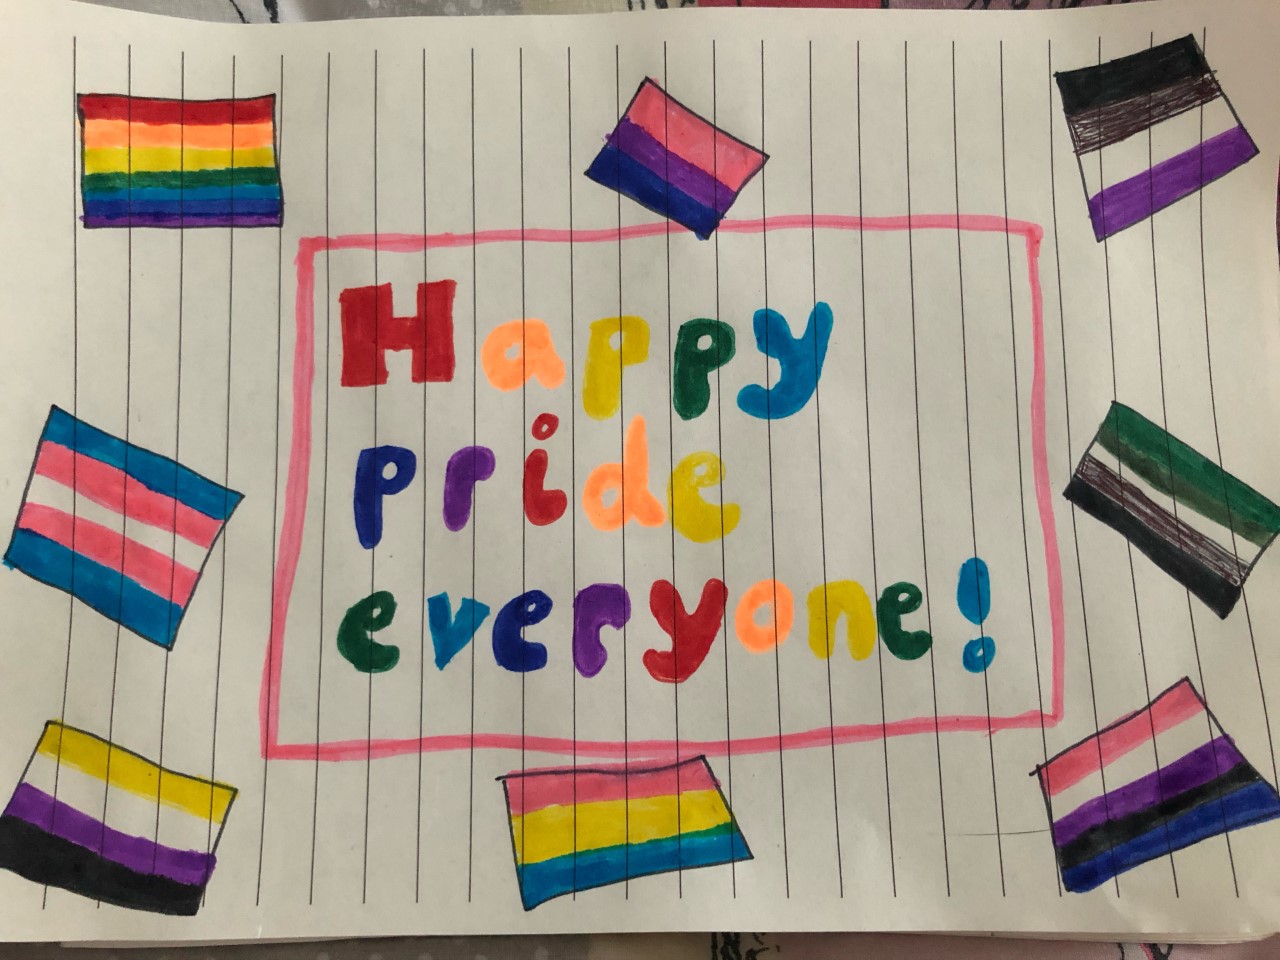 Happy Pride Everyone - A drawing with a selection of pride flags